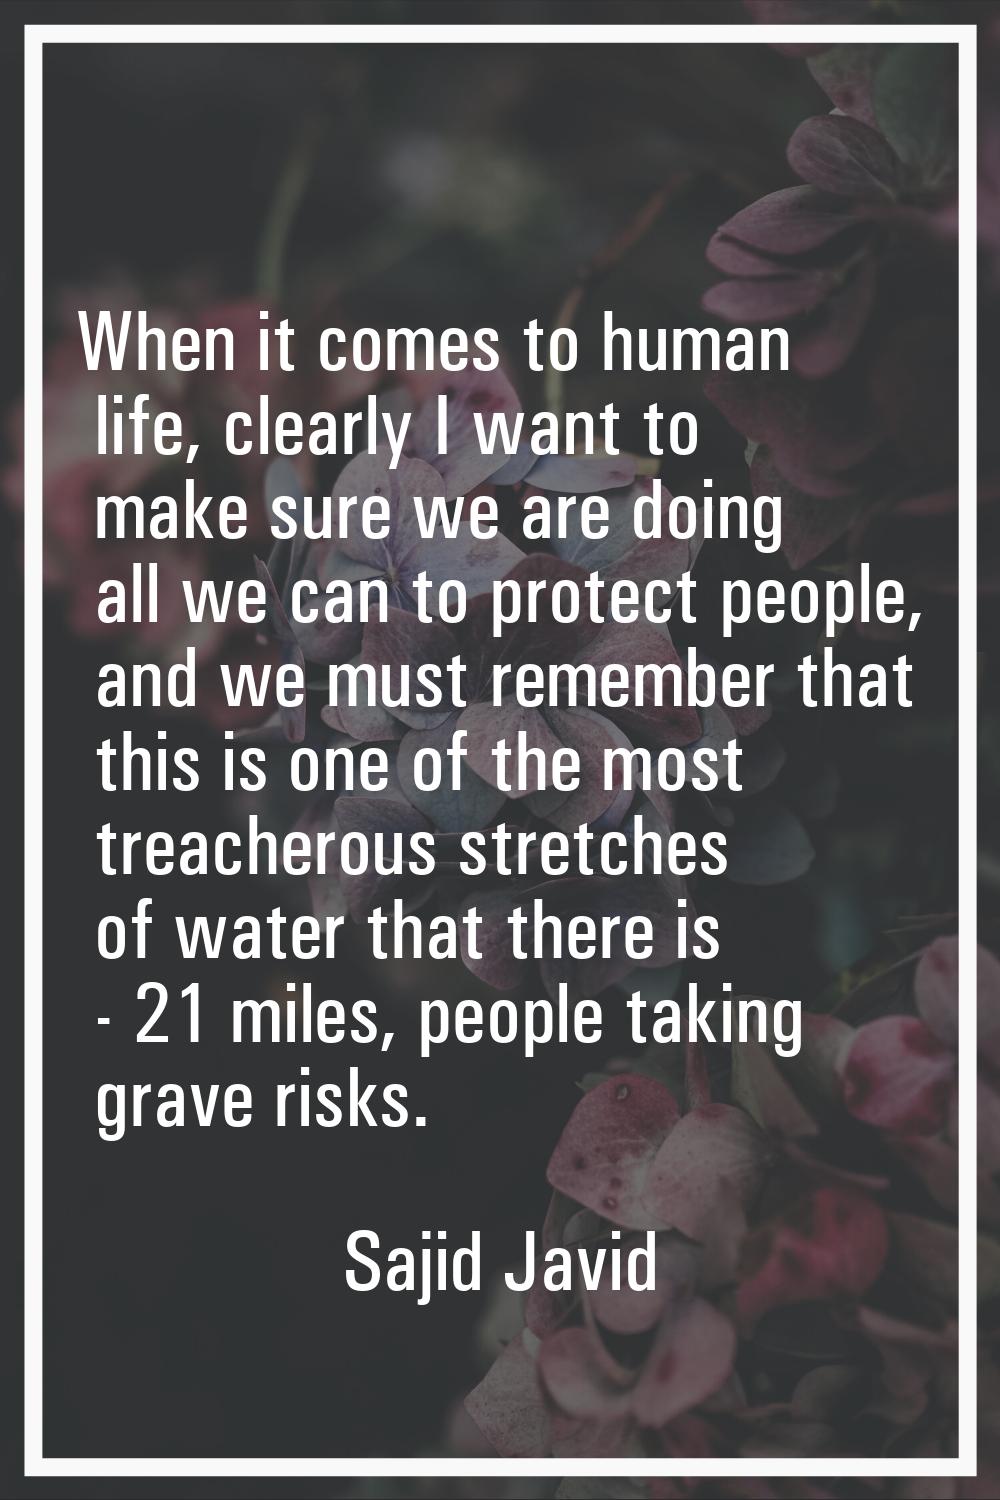 When it comes to human life, clearly I want to make sure we are doing all we can to protect people,